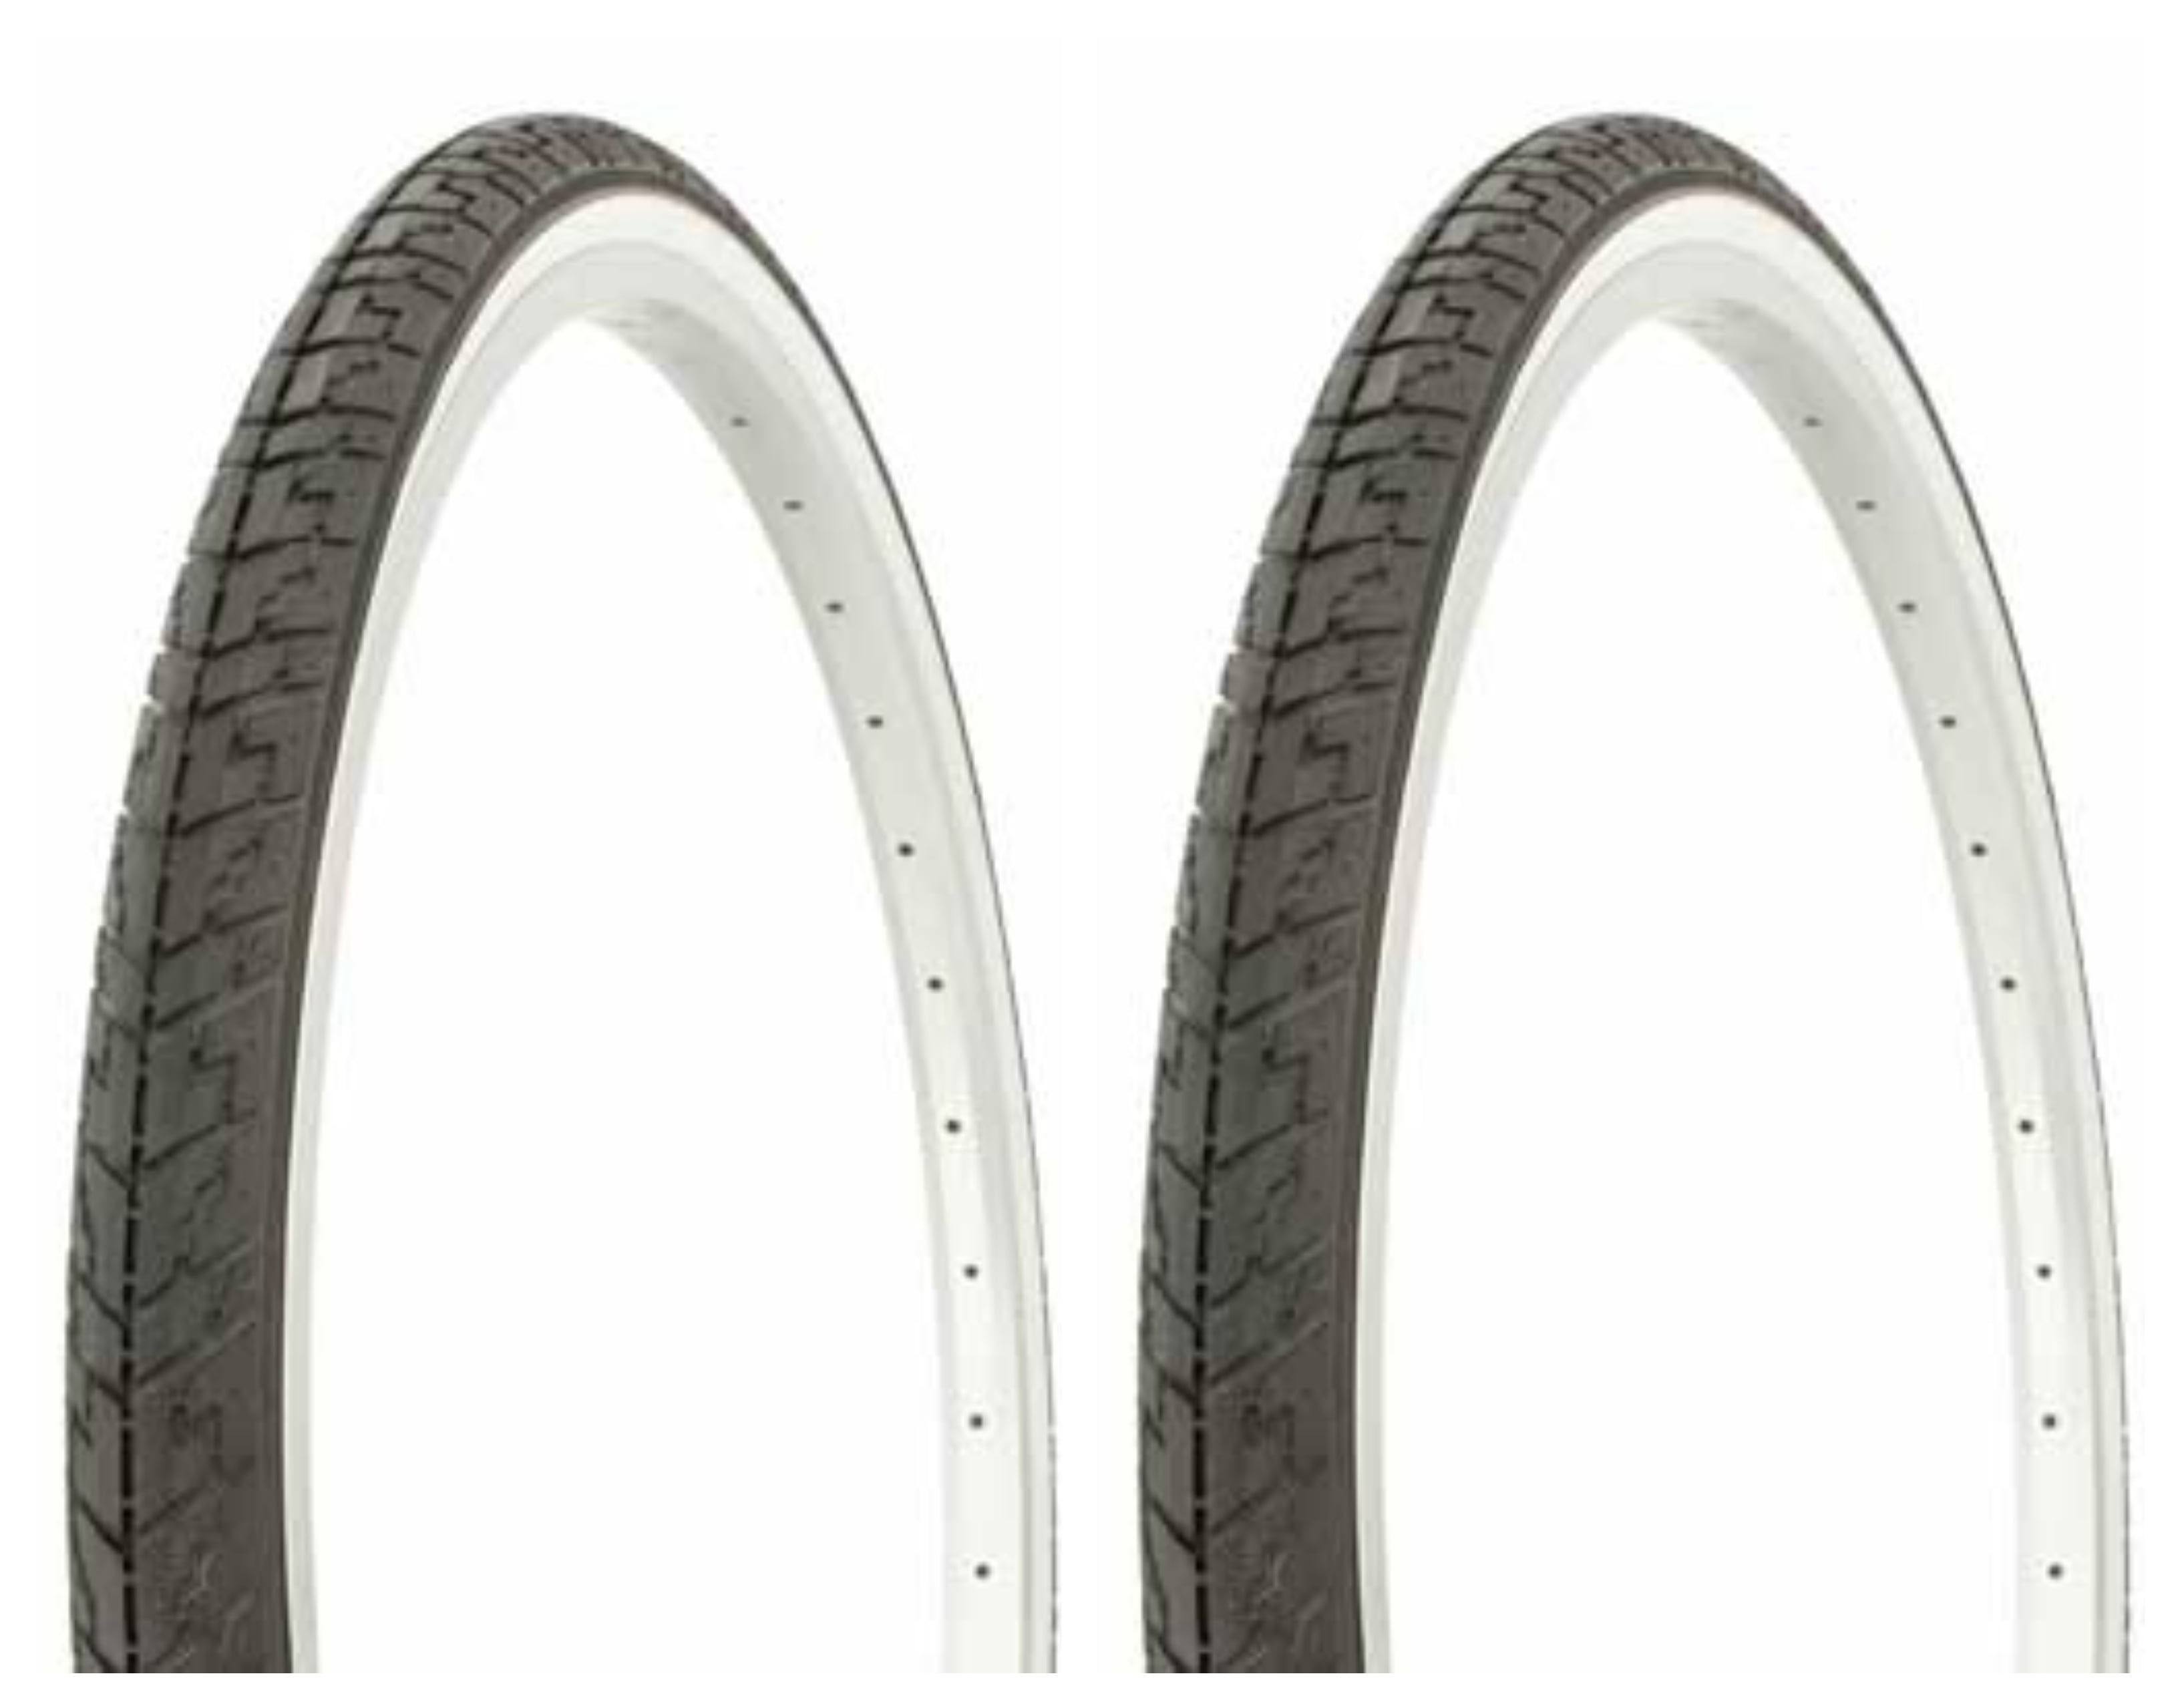 26 x 3.00 White-Wall Bicycle Tires with 2 2 2 Tubes & Vee-Rubber Liners